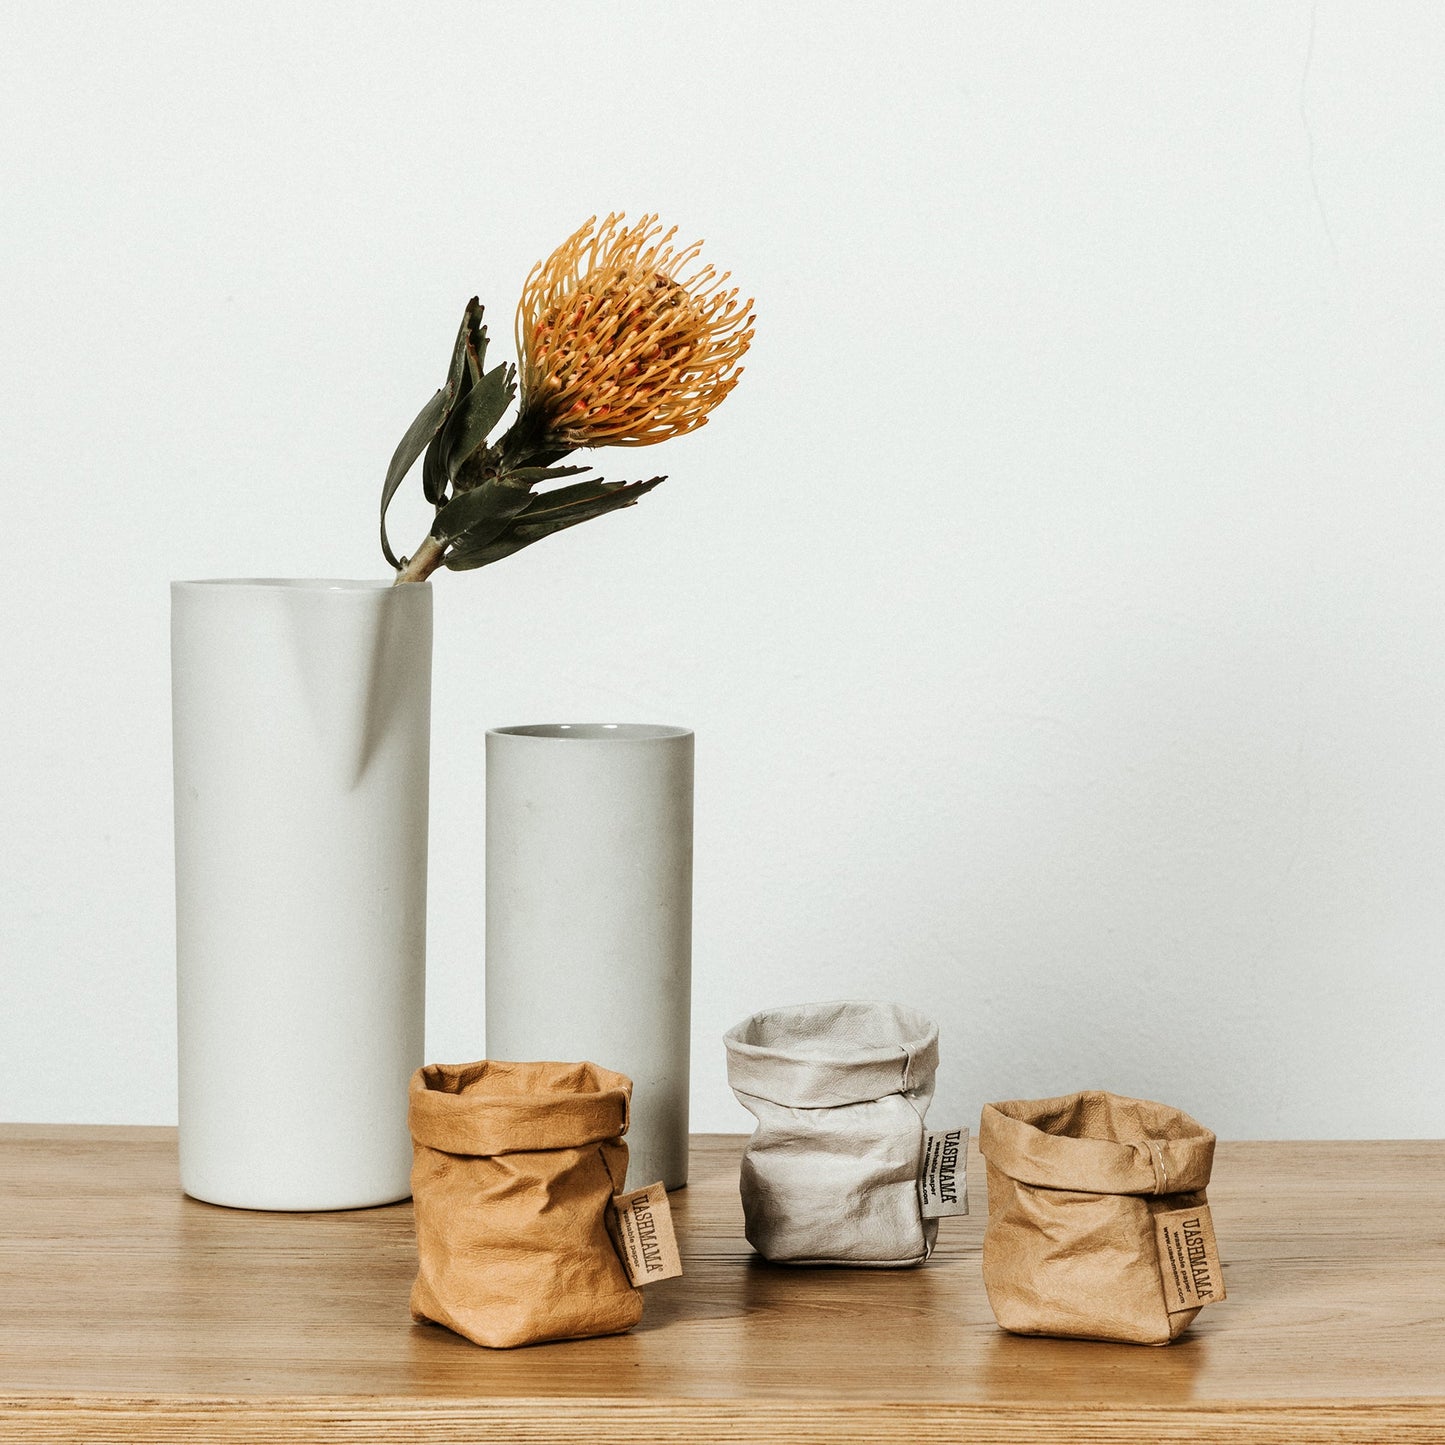 Three extra small washable paper bags are shown sitting on a wooden surface. Two bags are tan and one is pale grey. To the right of the image are two cylindrical vases in pale grey. One vase is holding a dried flower.